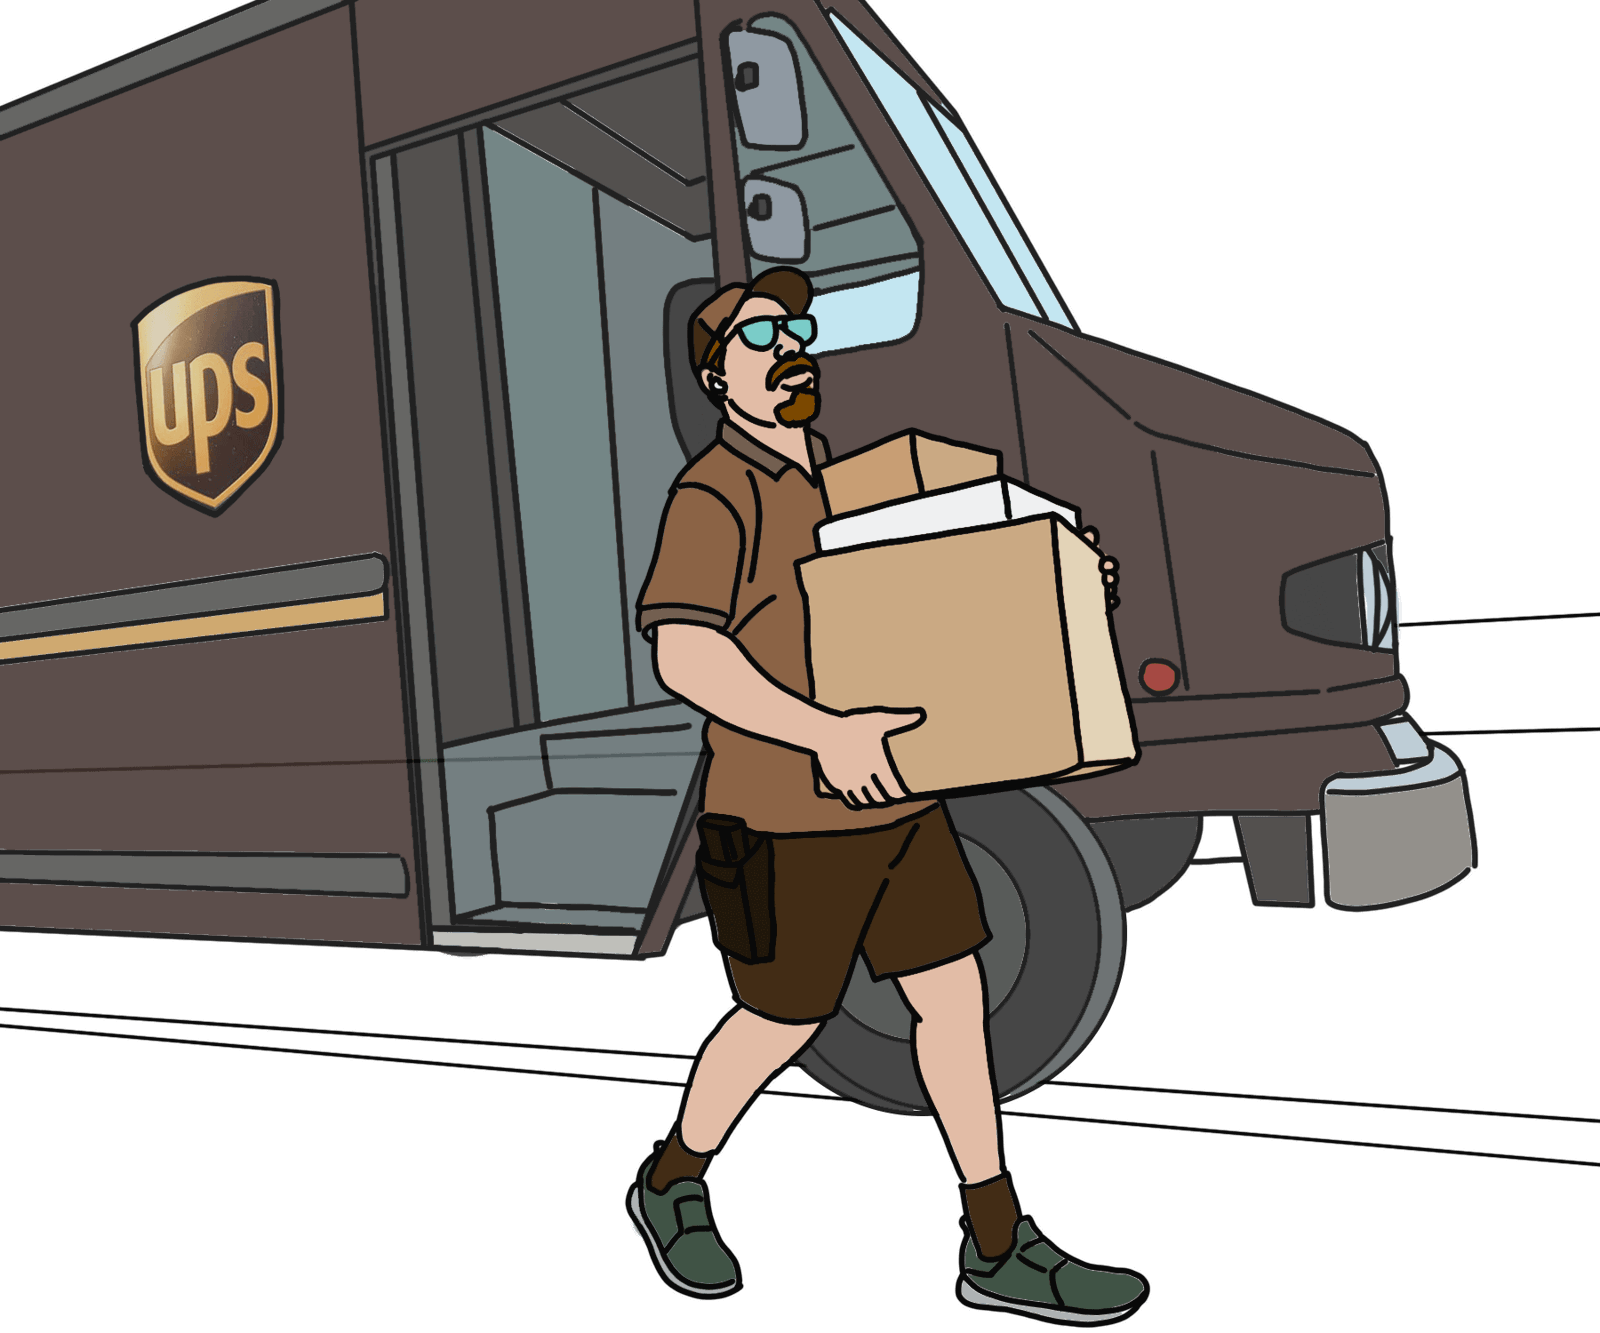 When launching cardboard boxes that say fragile, brown khaki shorts are a must